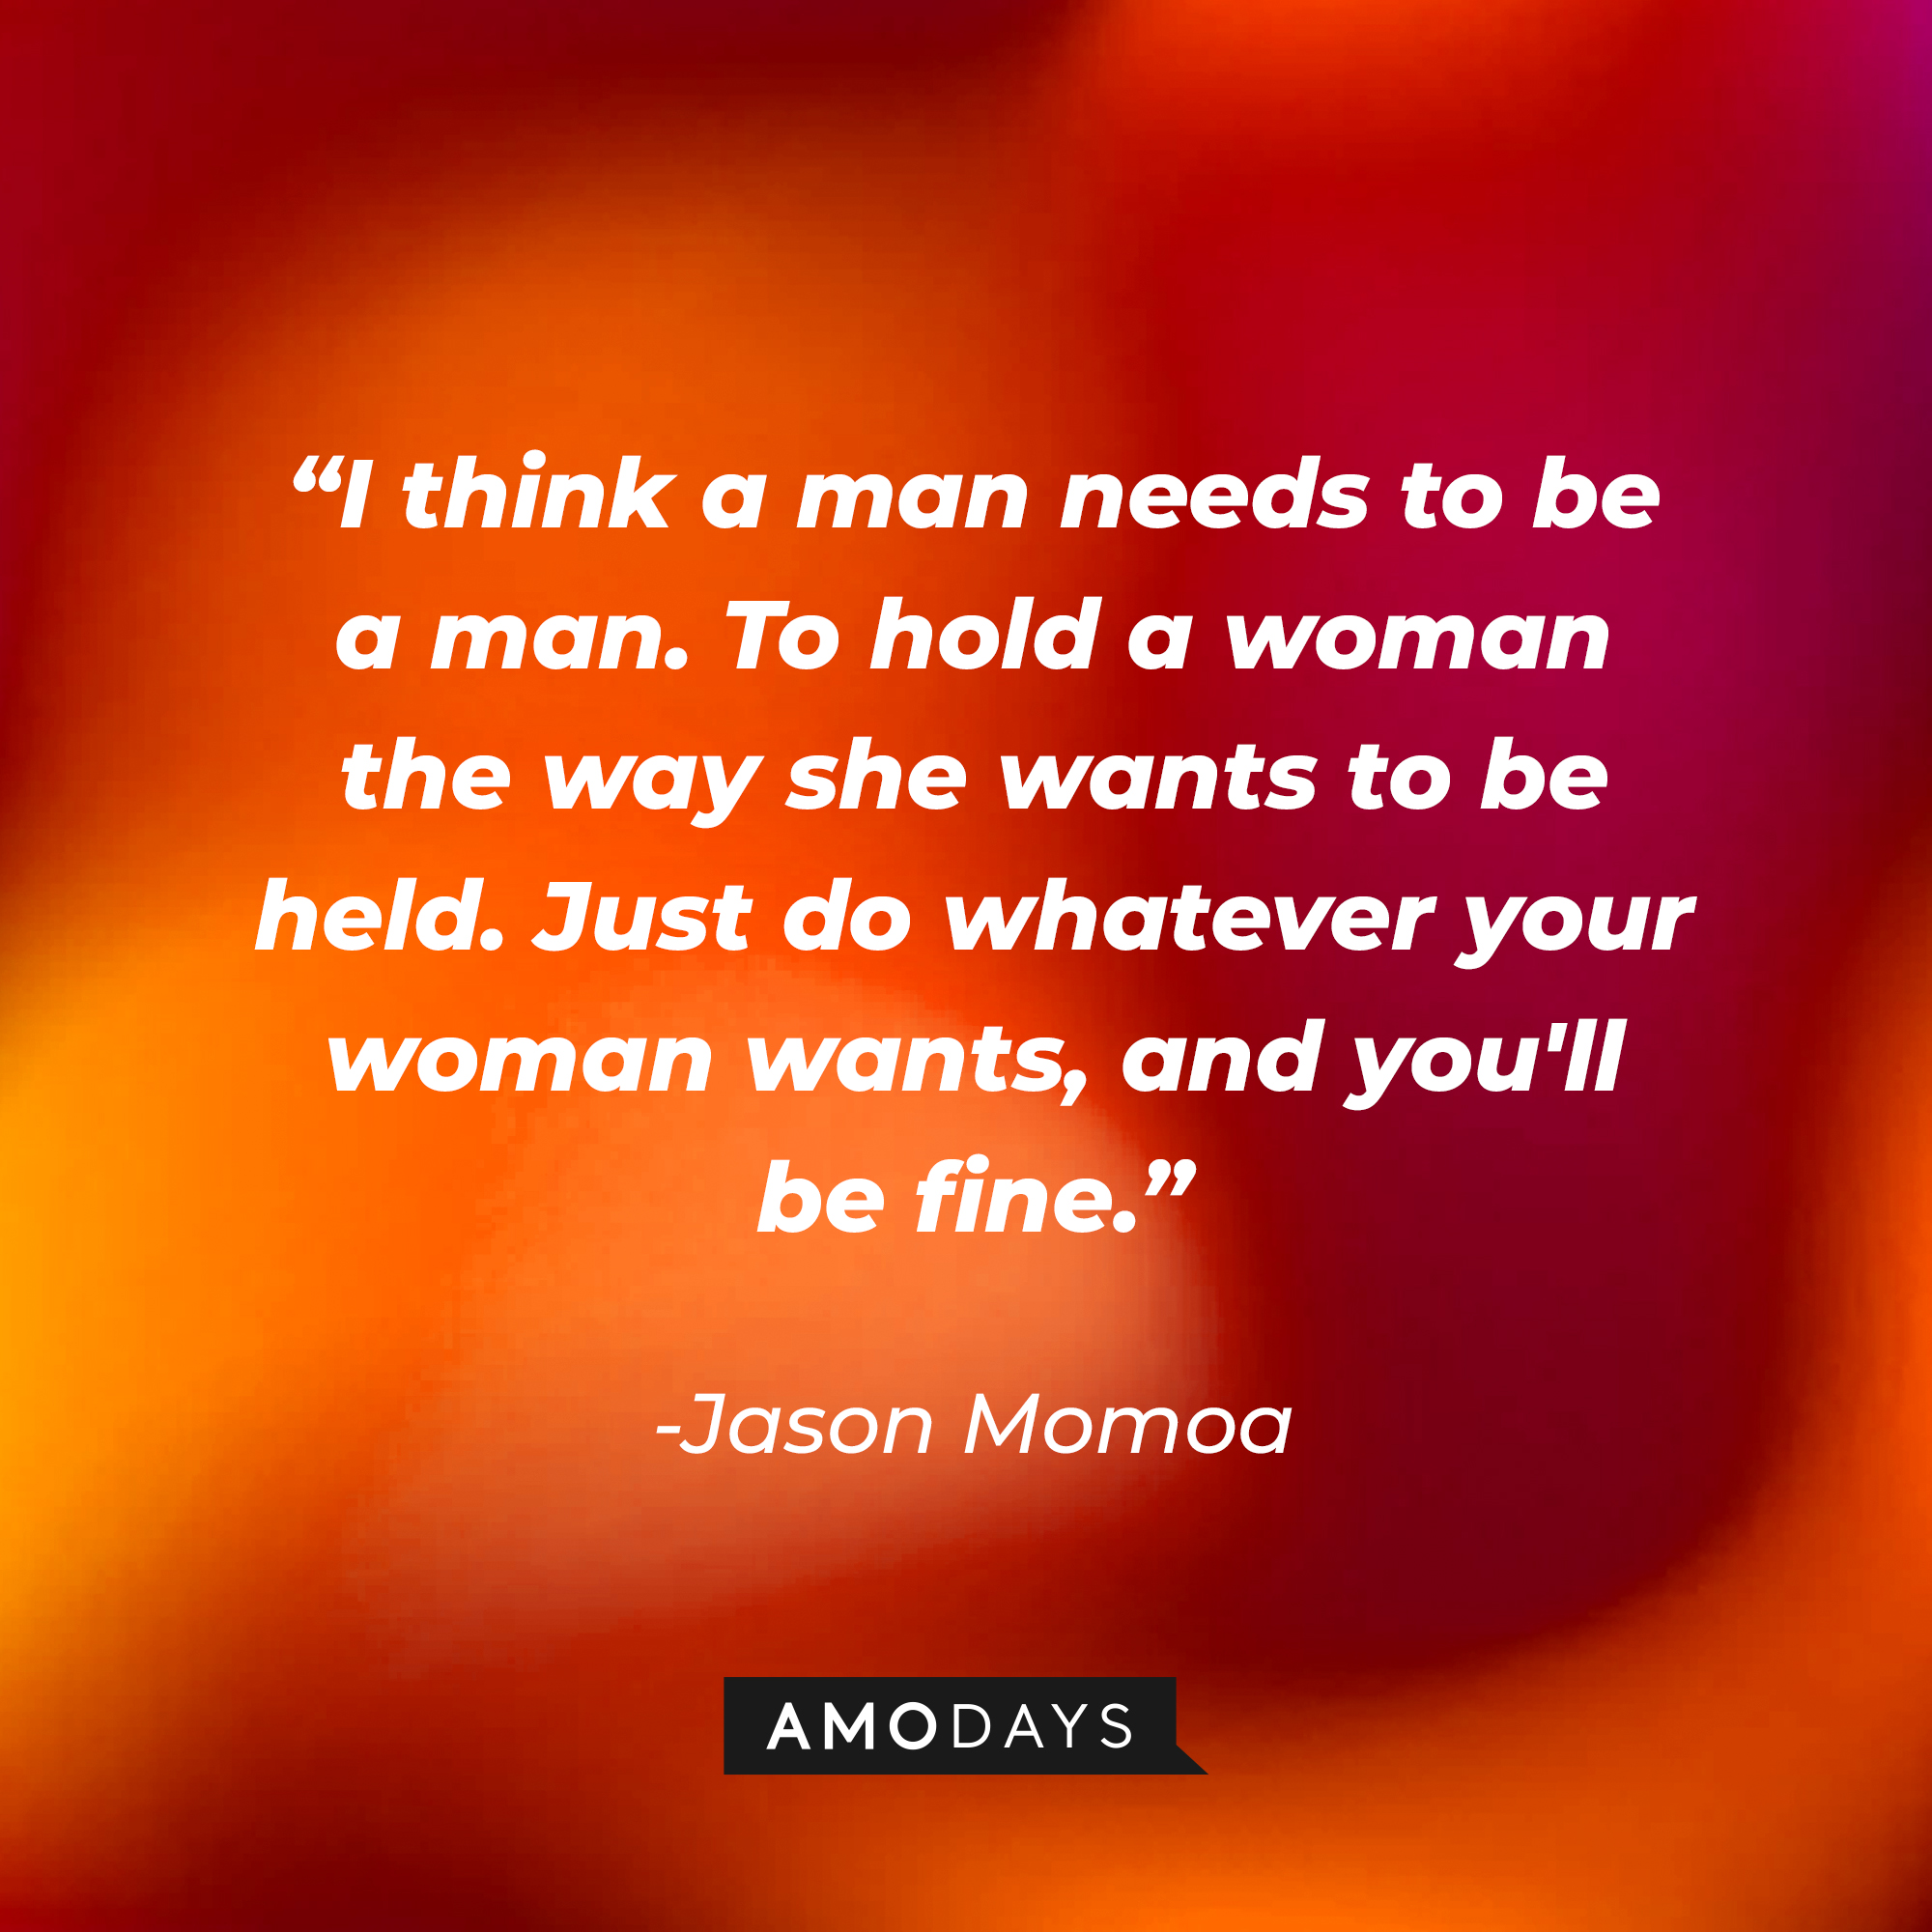 Jason Bateman's quote: “I think a man needs to be a man. To hold a woman the way she wants to be held. Just do whatever your woman wants, and you'll be fine.” | Source: Amodays